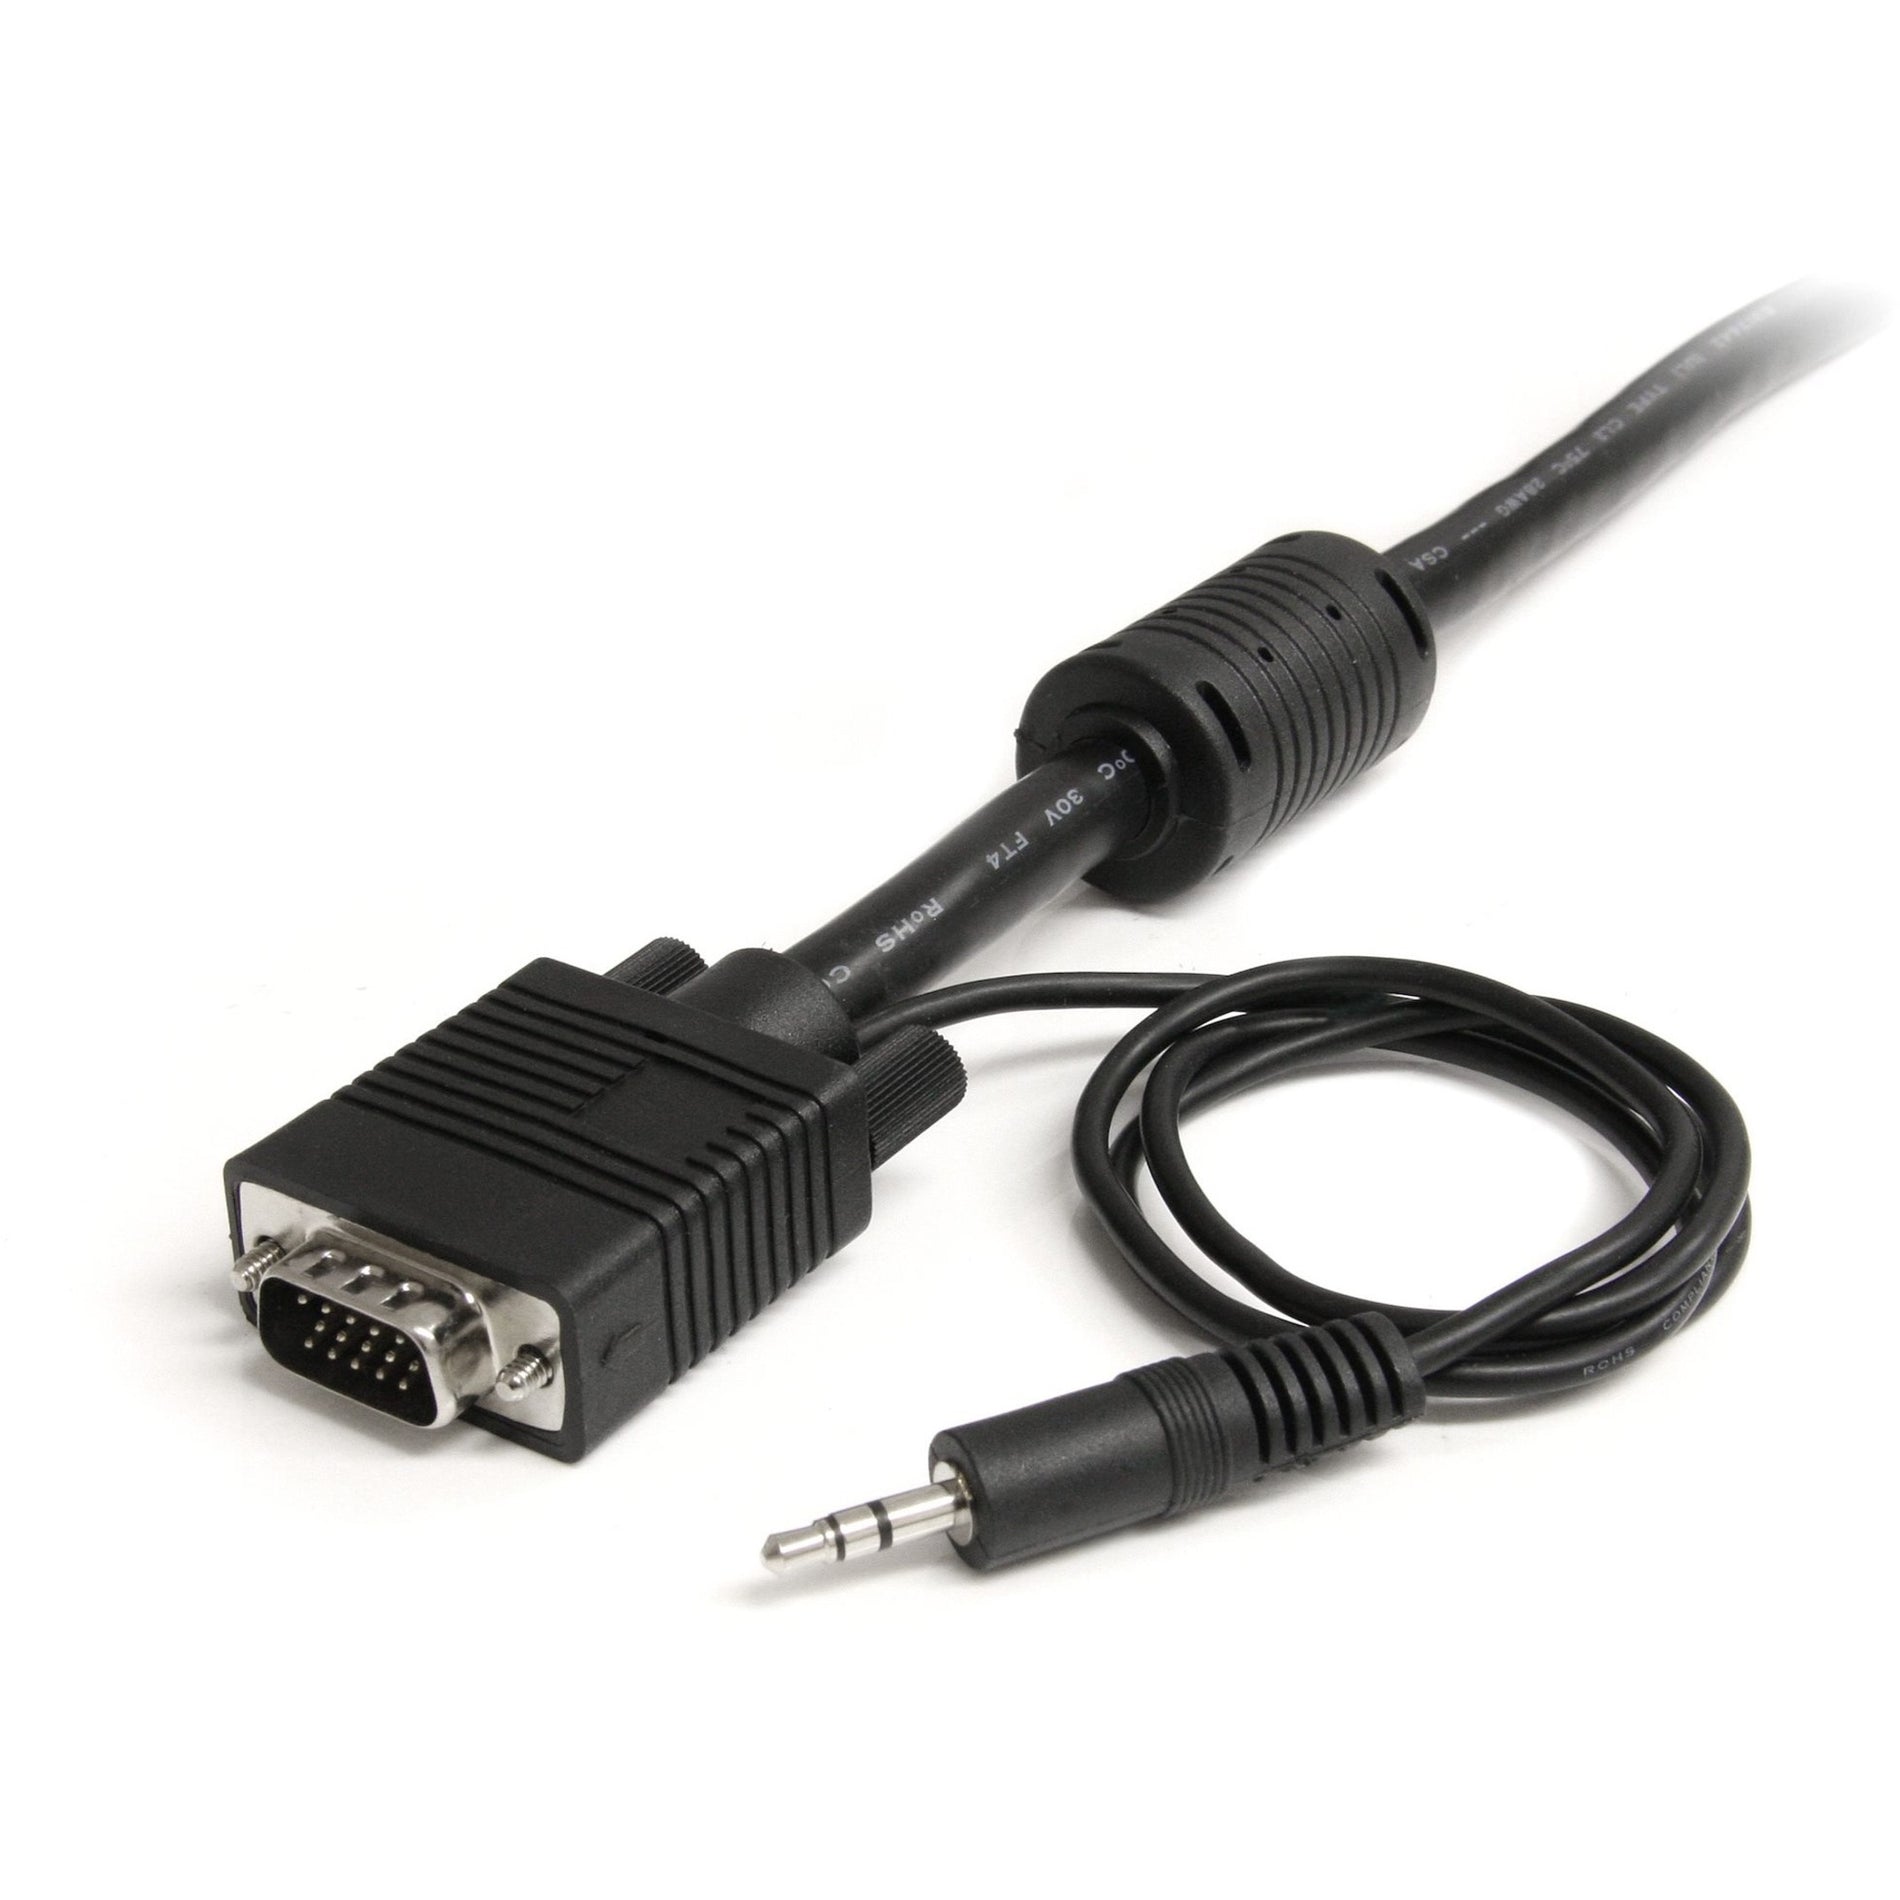 StarTech.com MXTHQMM25A 25 ft Coax High Resolution Monitor VGA Cable with Audio, 1920 x 1200 Supported, Nickel Plated Connectors